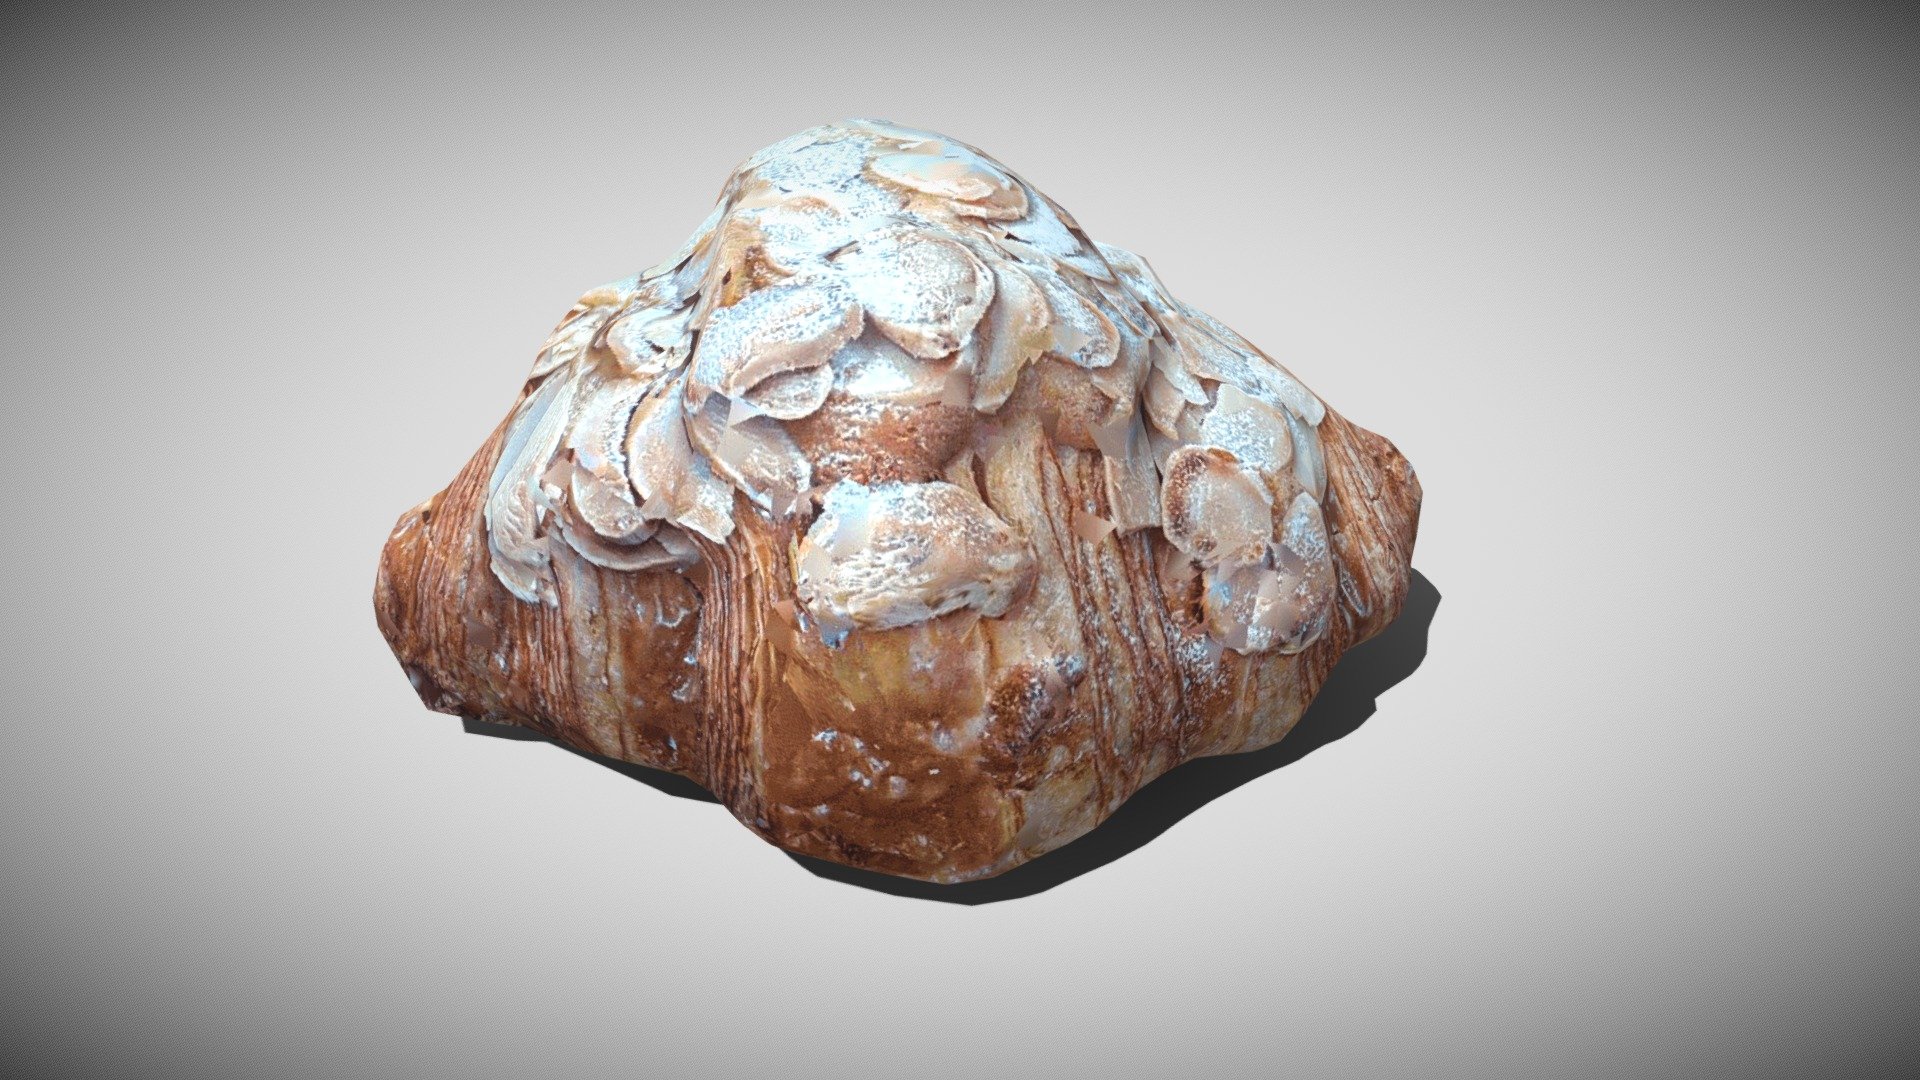 infared scanned model. Lowpoly version of this model:

https://sketchfab.com/3d-models/almond-croissant-4k-texture-and-high-details-030e8ee7e3cd4764b2f0905d3e79aac2

AVAILABLE FOR DOWNLOAD SOON - Almond croissant (2K texture lowpoly) - 3D model by lannoo.niels 3d model